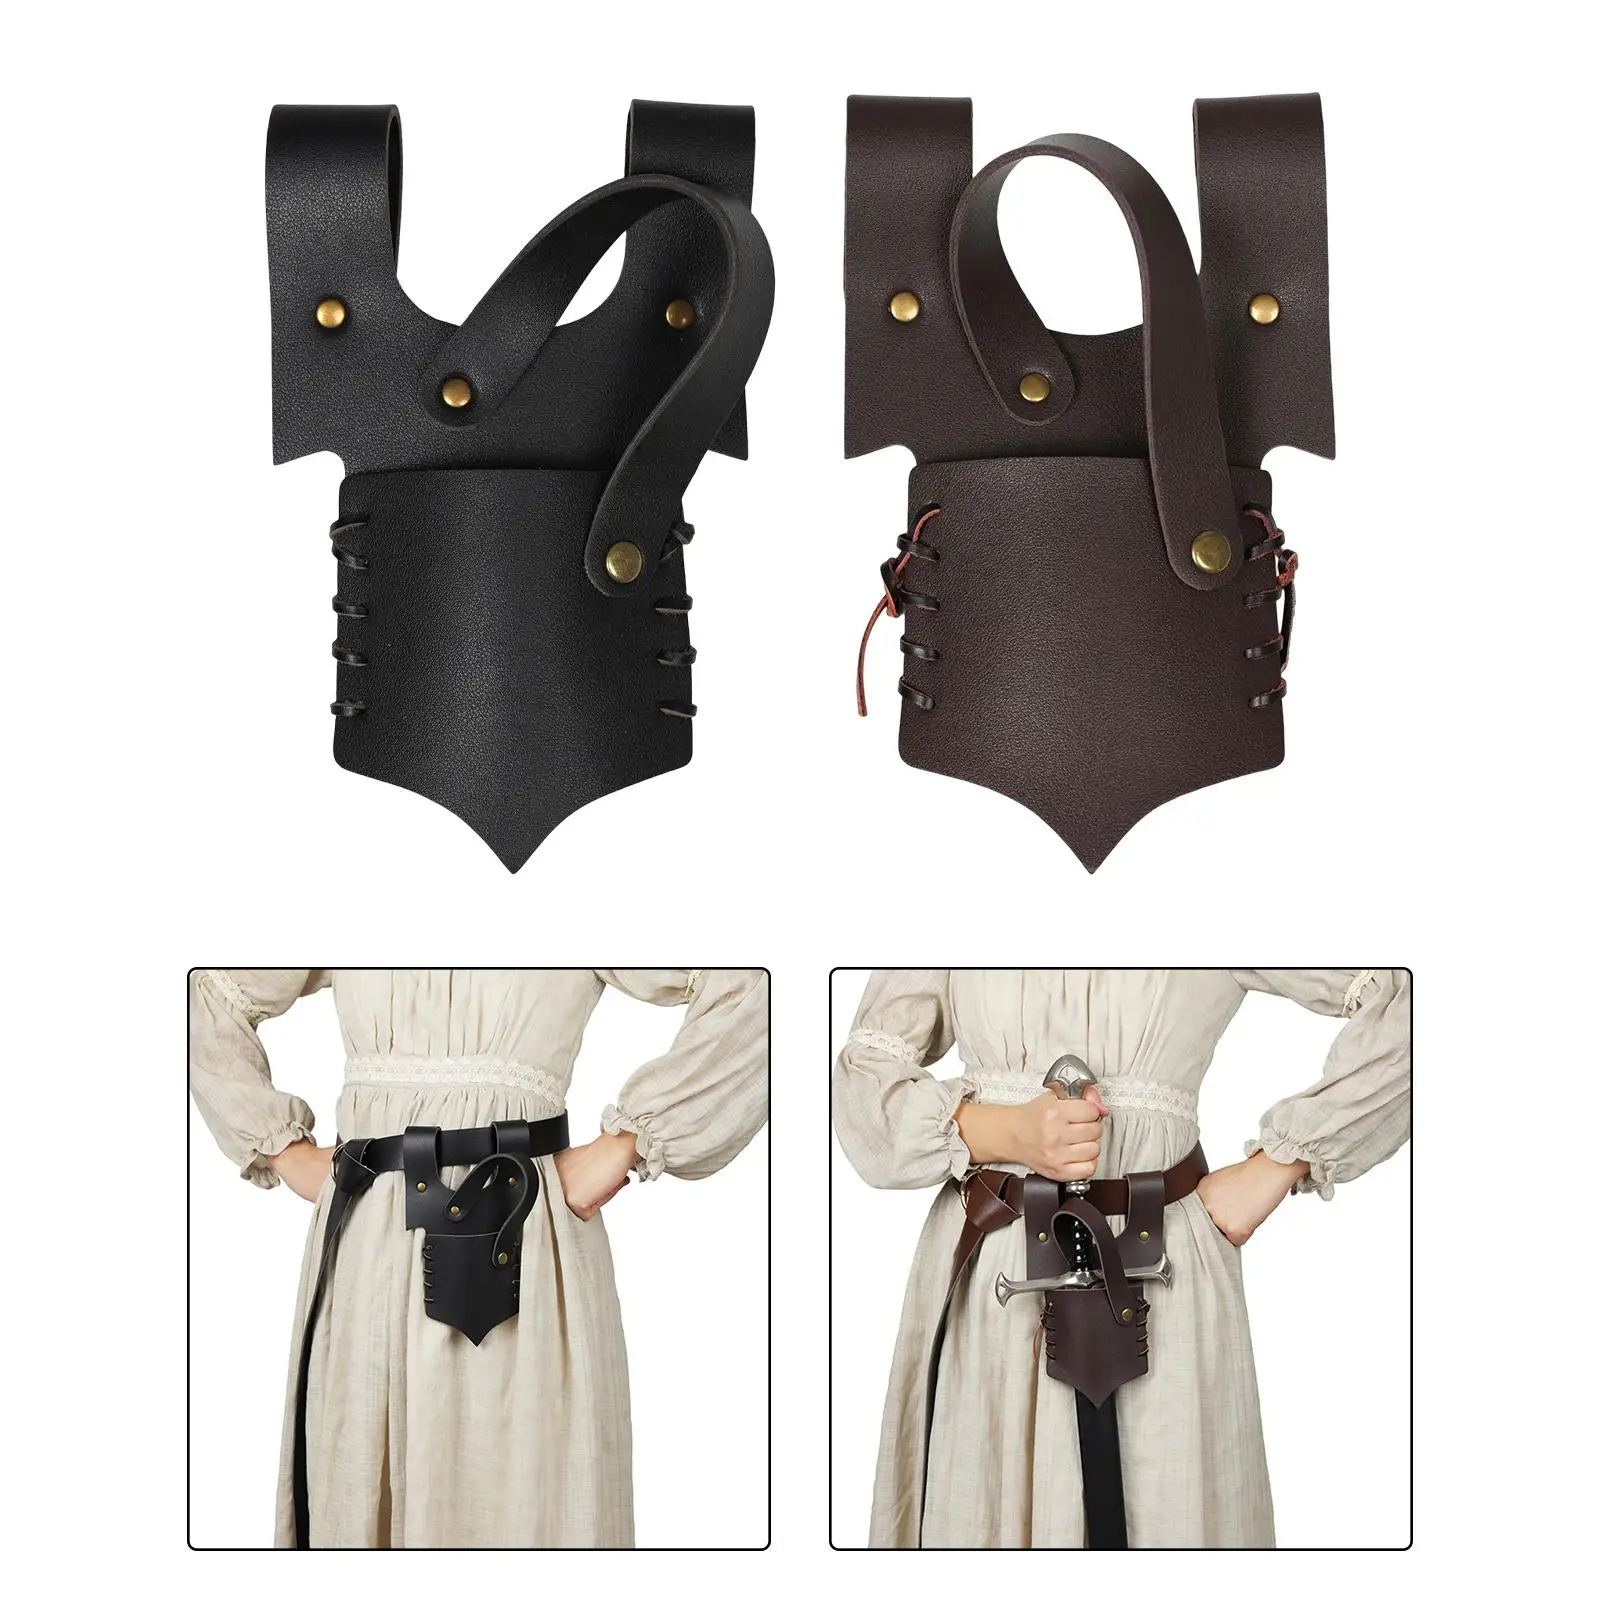 Medieval Leather Strap  Holder  Sheath Retro Style Durable Scabbard for Stage Performances Role Playing Cosplay